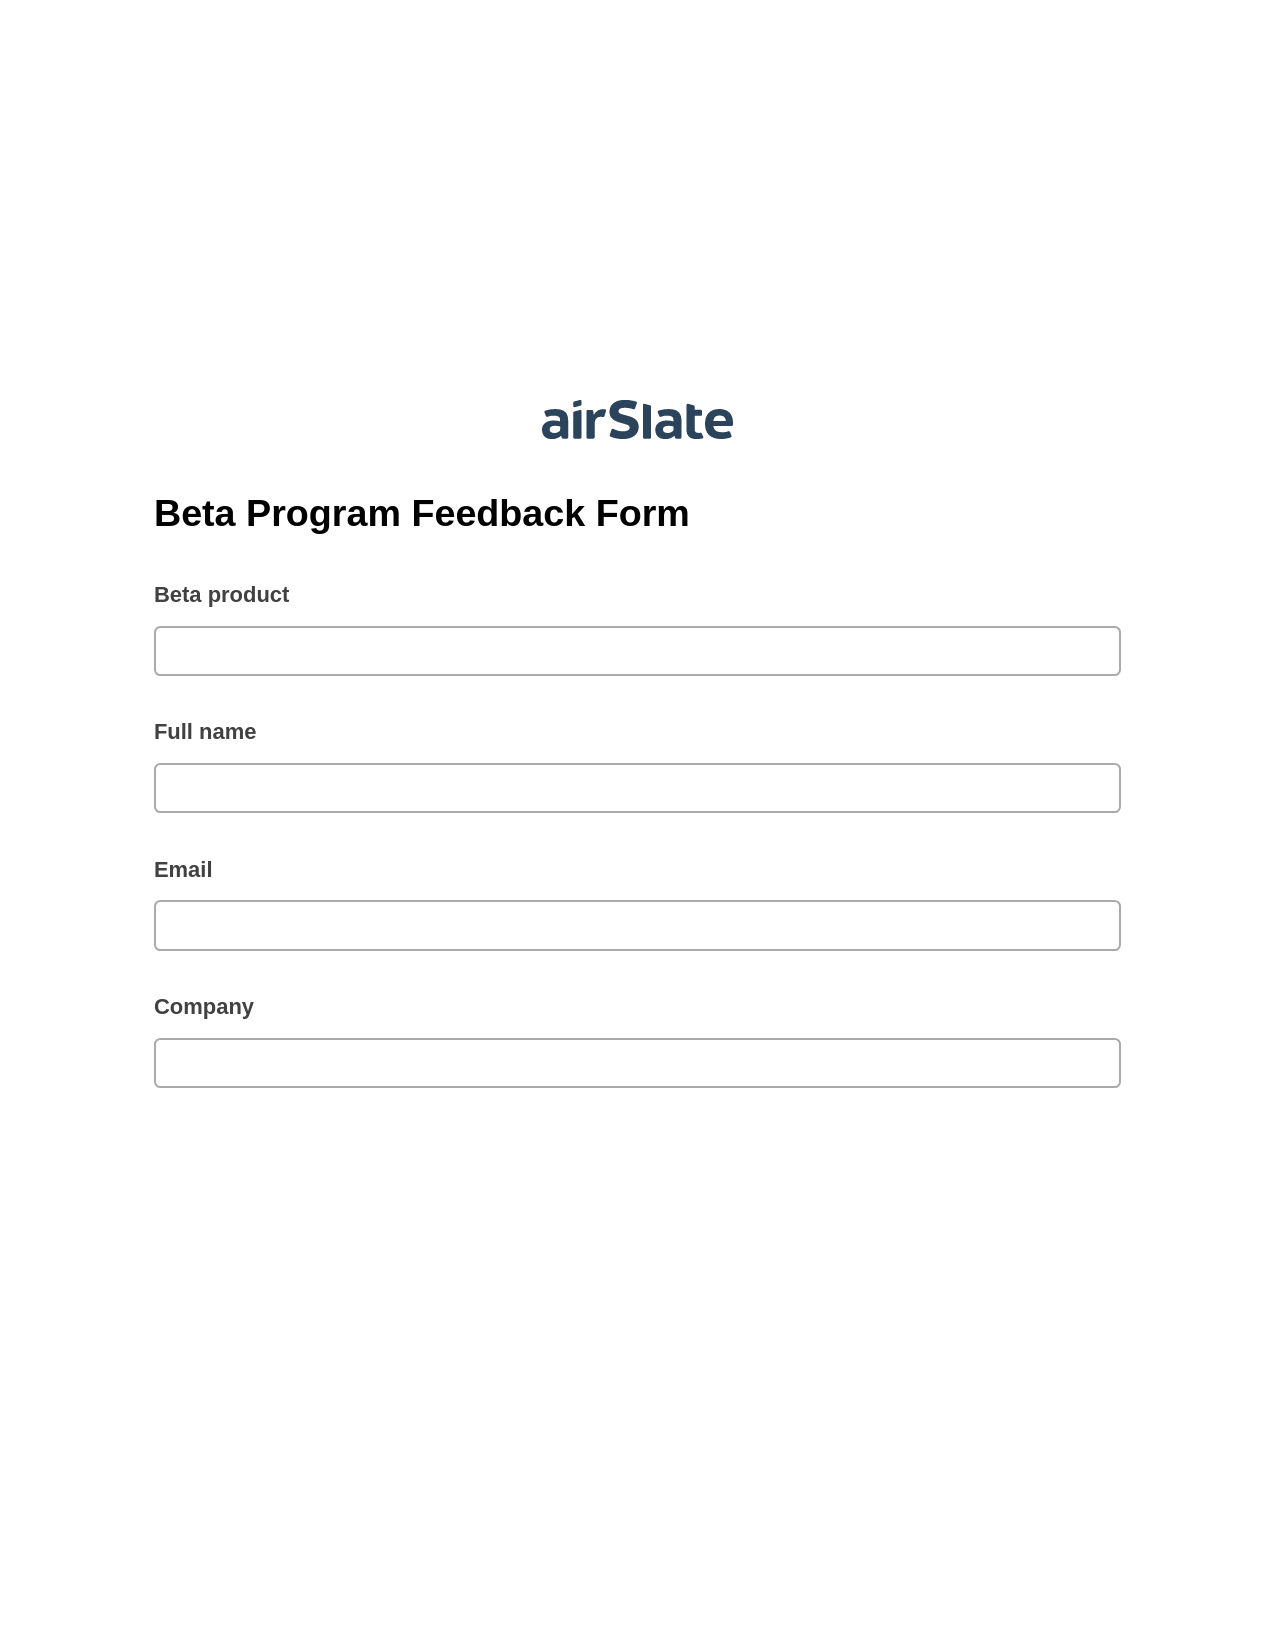 Multirole Beta Program Feedback Form Pre-fill from Salesforce Record Bot, Send a Slate with Roles Bot, Email Notification Postfinish Bot